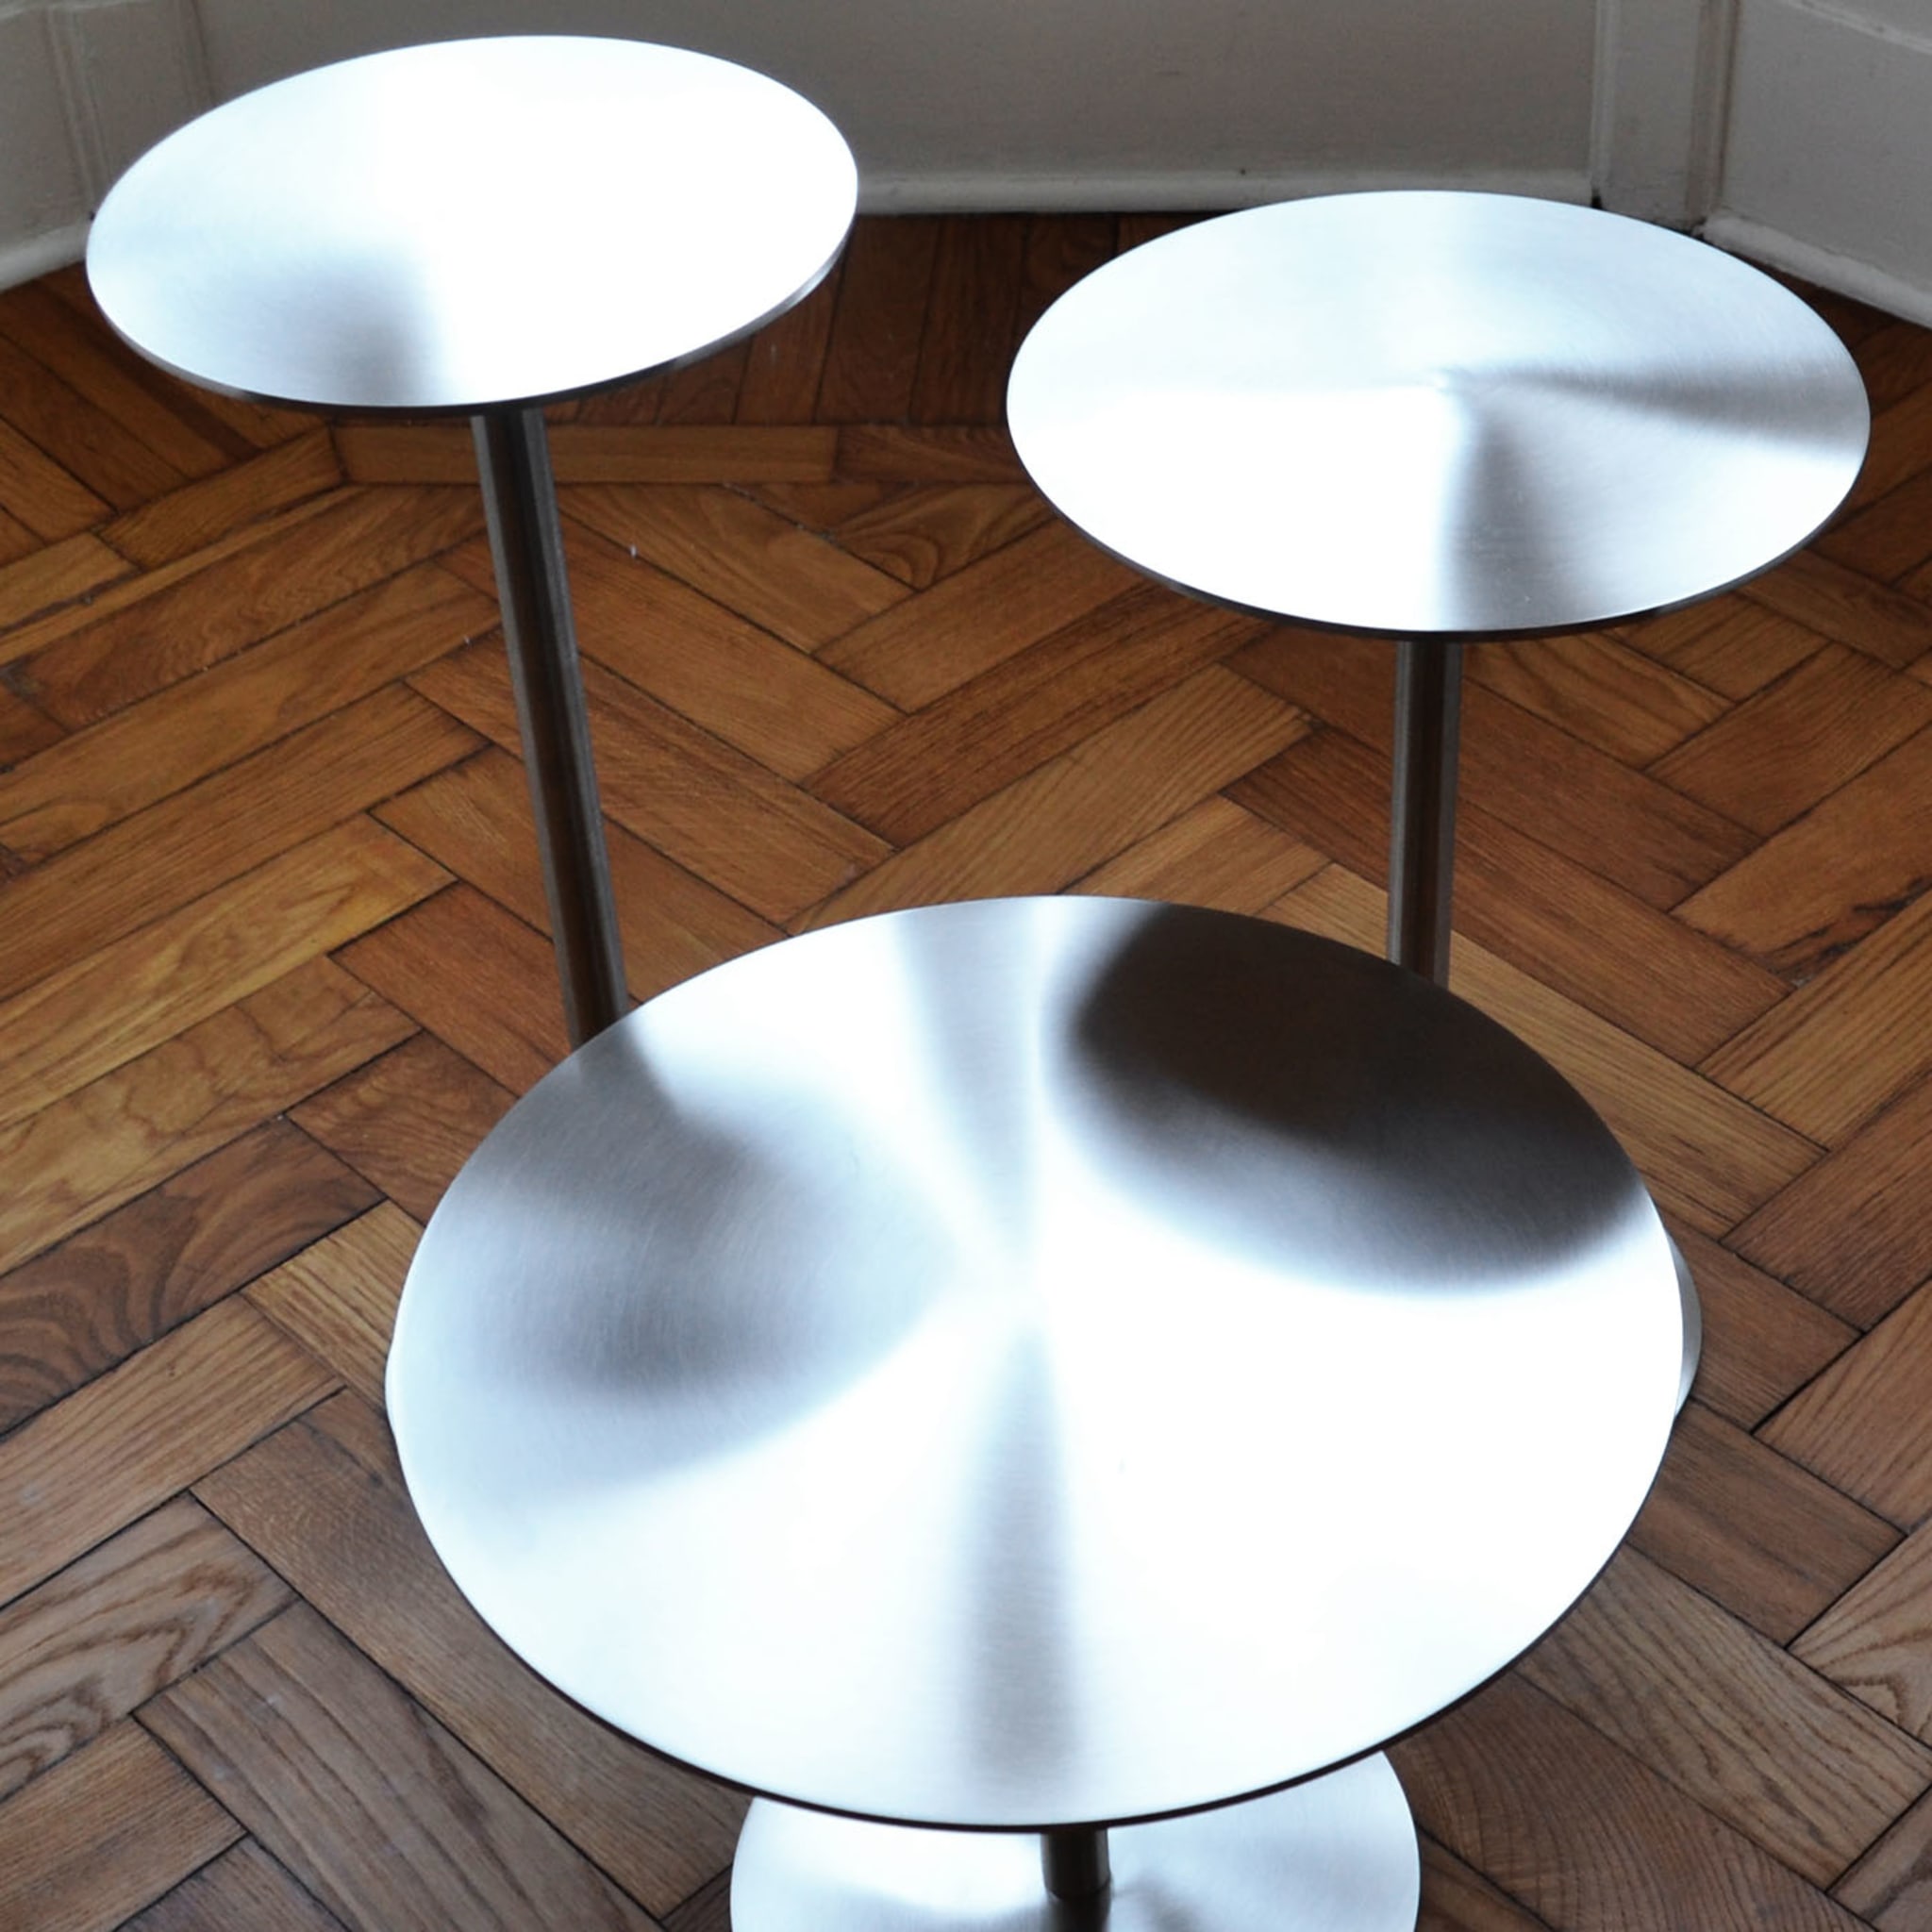 Ester Stainless Steel Table - Alternative view 2